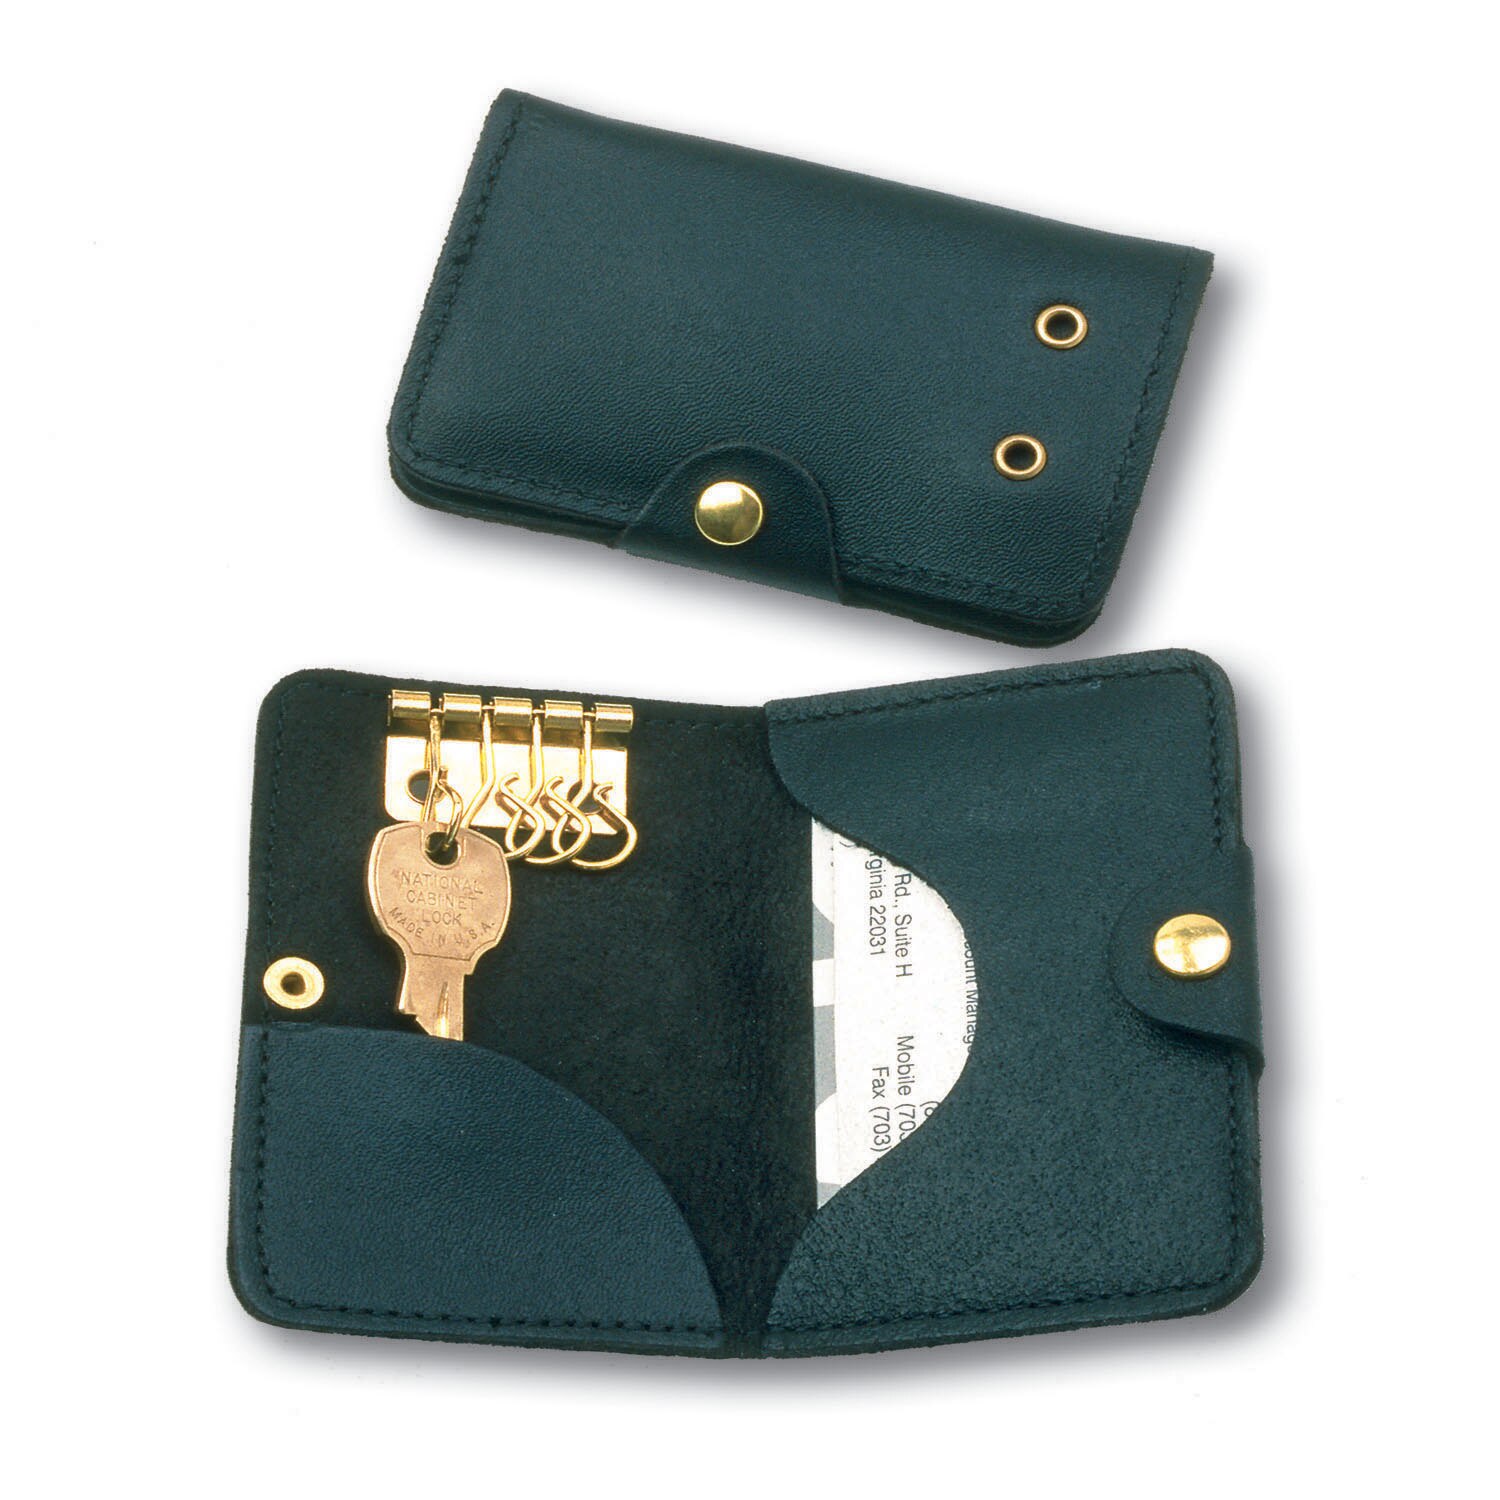 Holder, Key and Credit Card, Black Leather, 2-1/4" x 4"